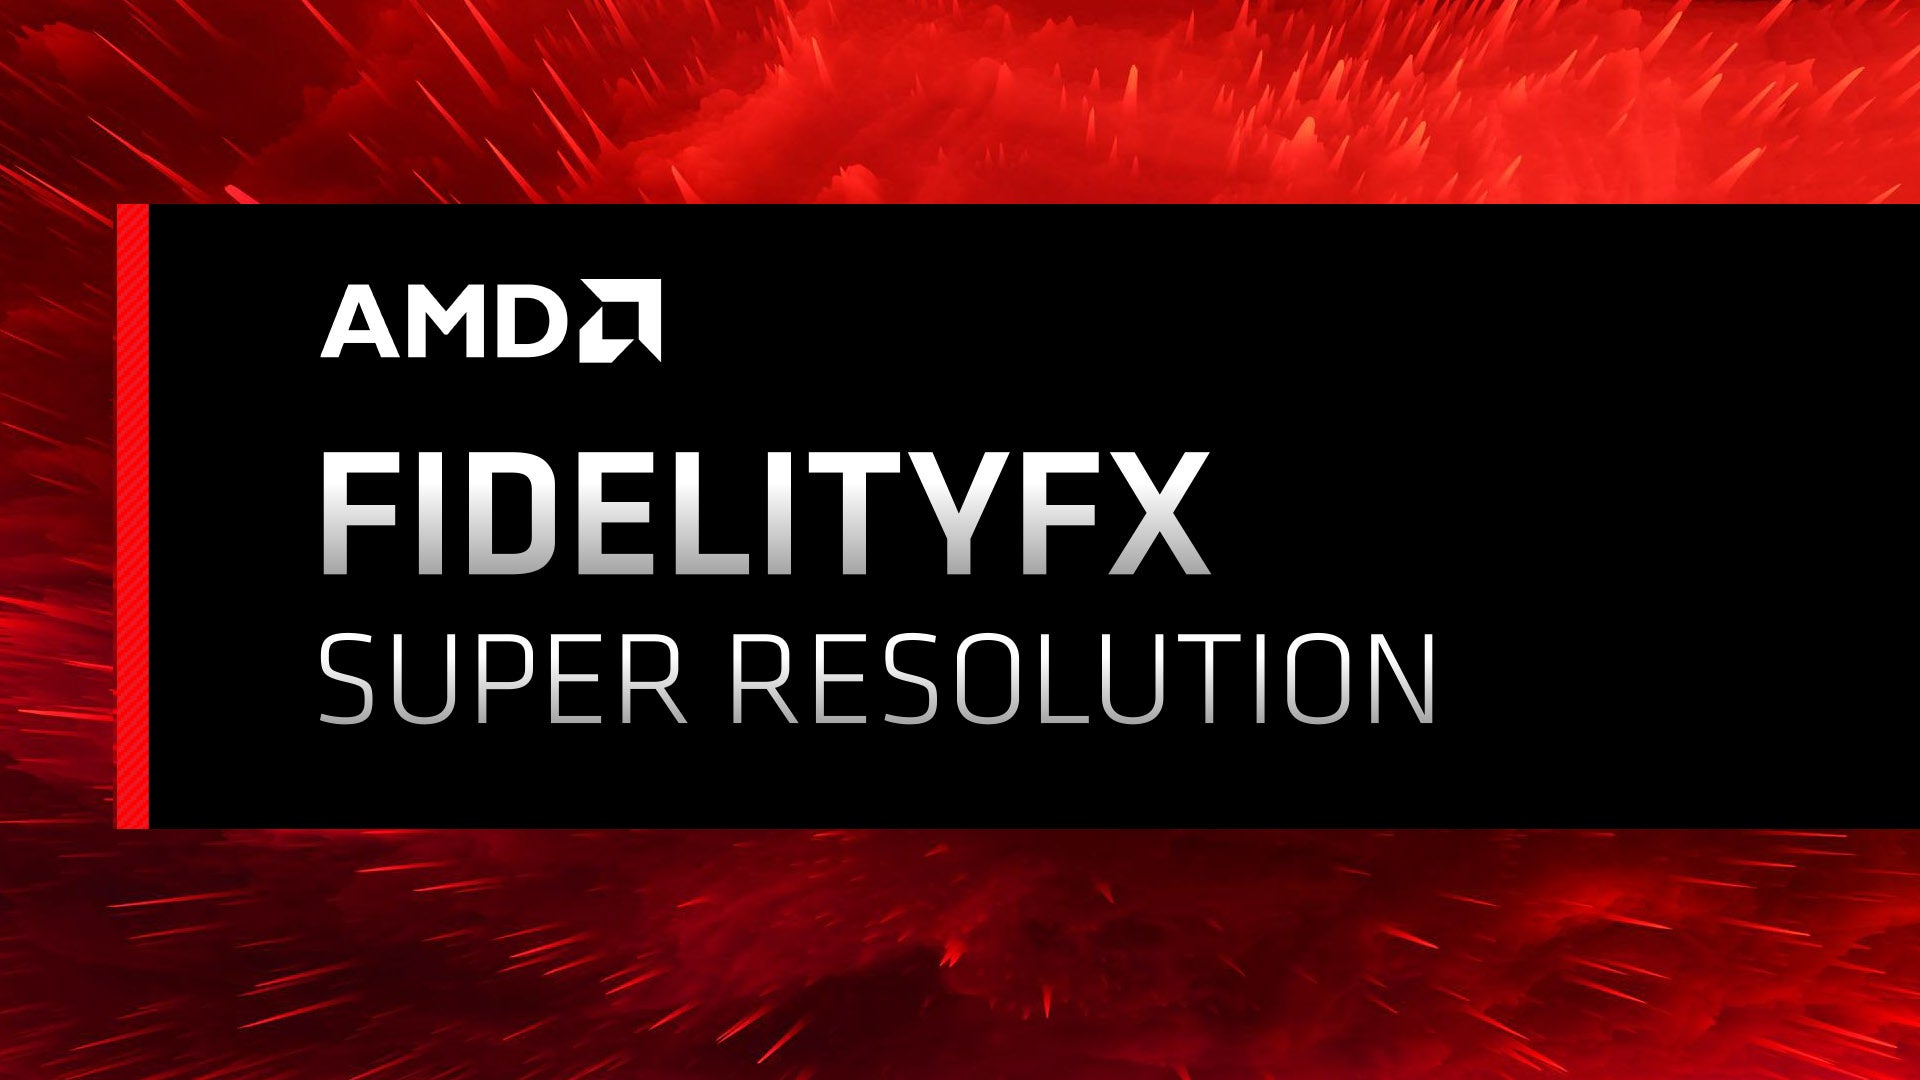 Image for AMD FidelityFX Super Resolution FSR Review: Big FPS Boosts, But Image Quality Takes A Hit